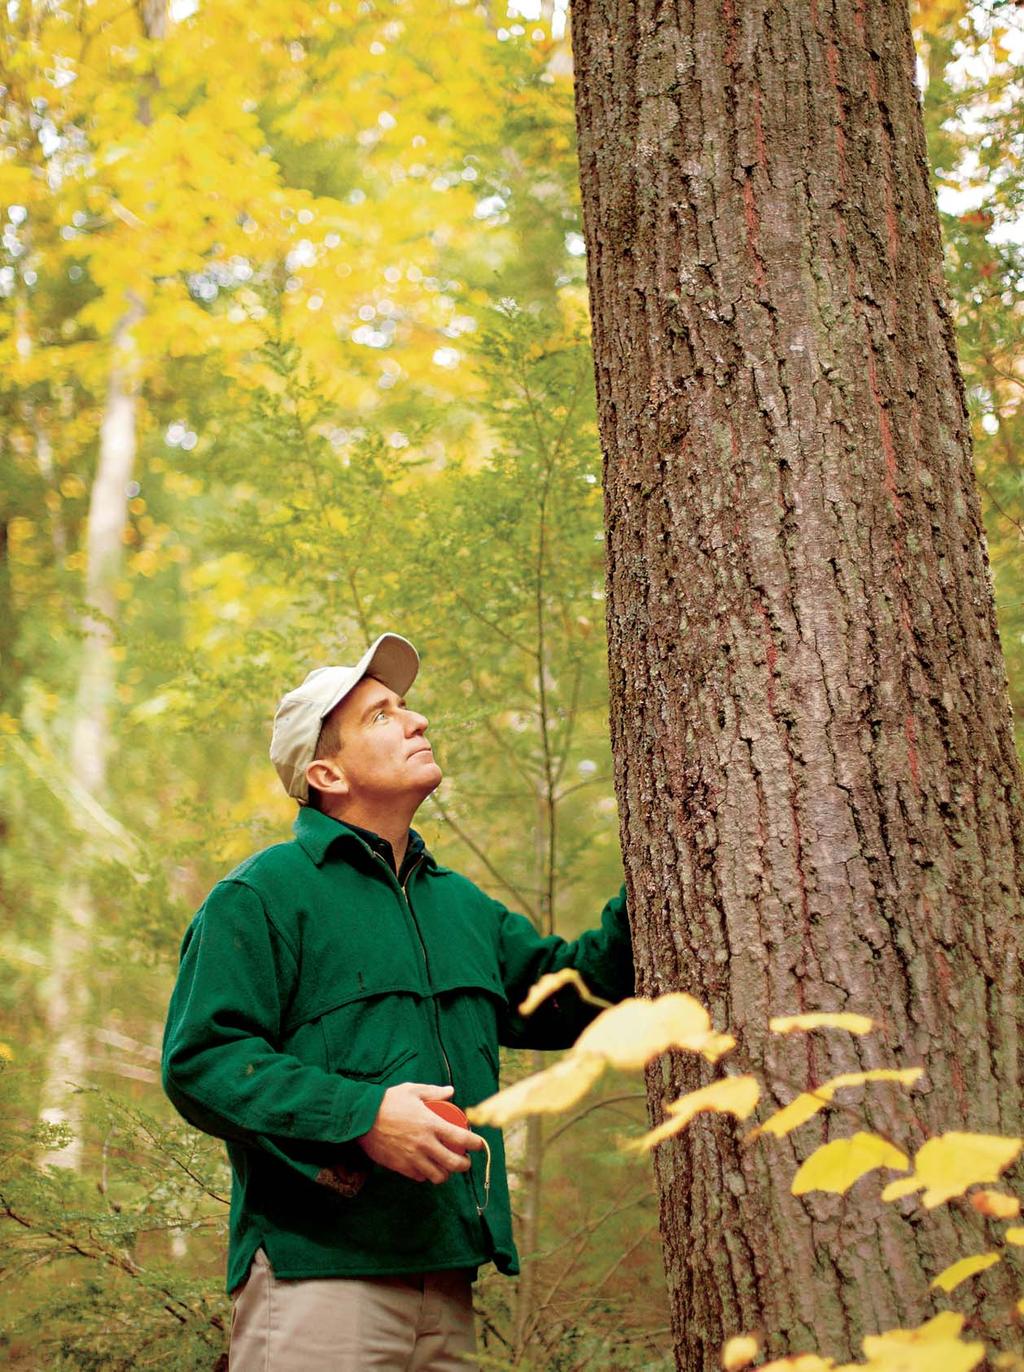 Danzer Group is continuing to purchase sustainably managed hardwood forests aimed at securing our raw materials for the long term. for decades and are constantly building new partnerships.